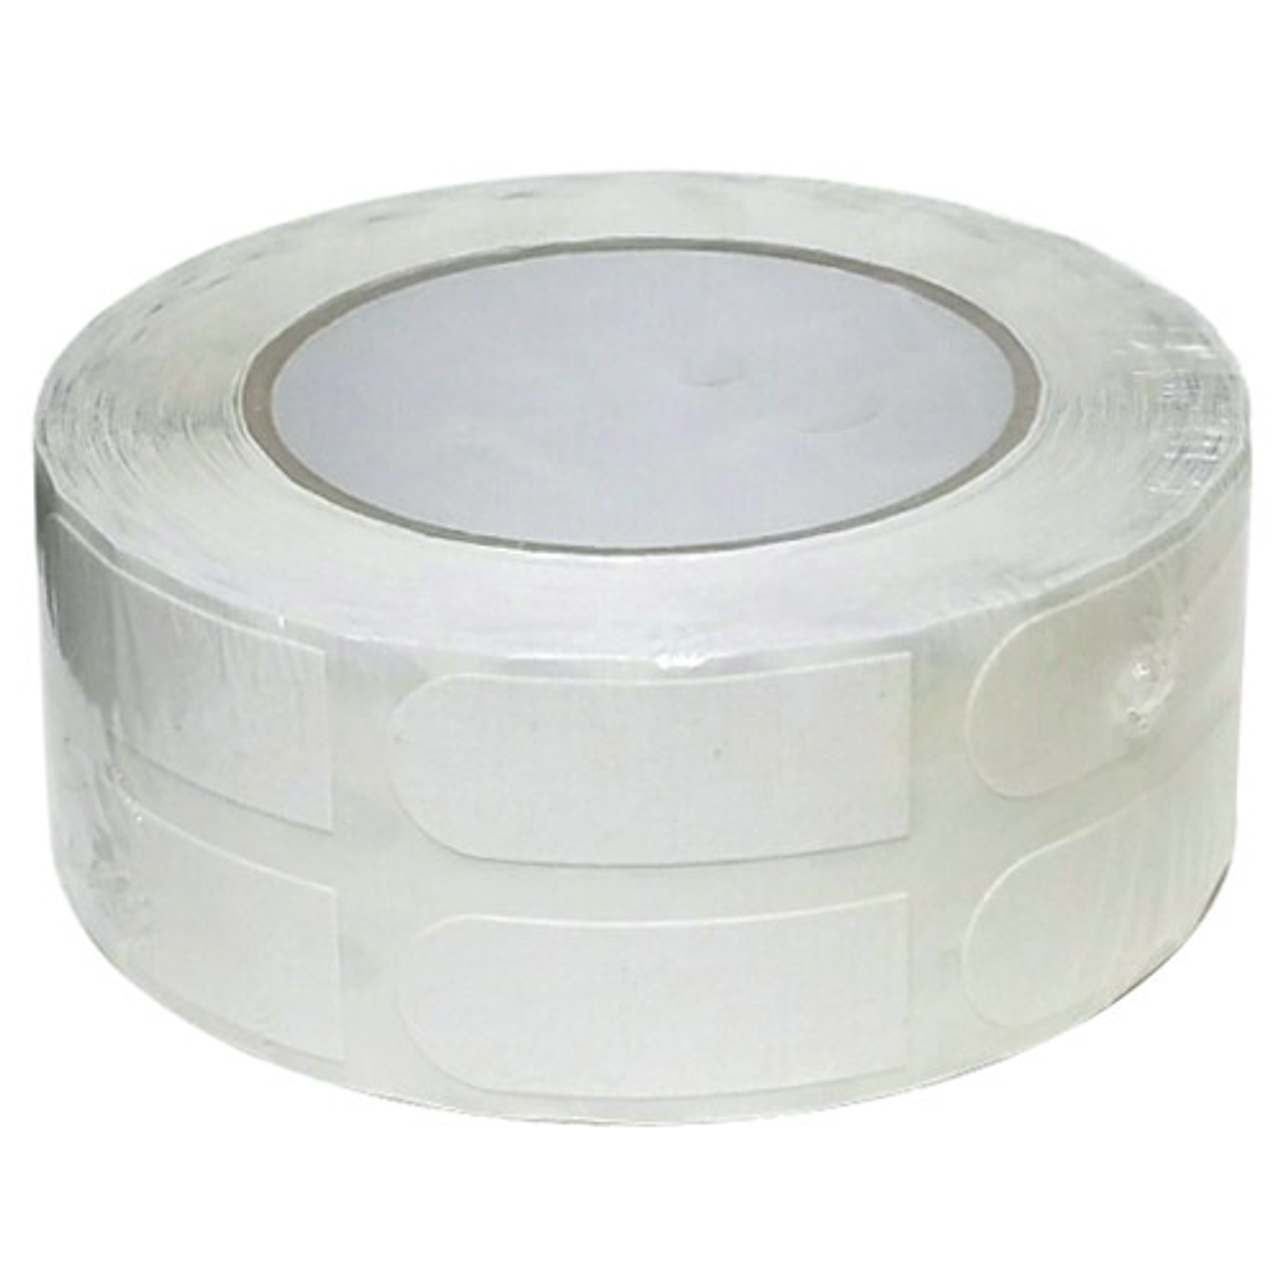 Turbo Bowlers Tape 3/4" White - 500 Pieces